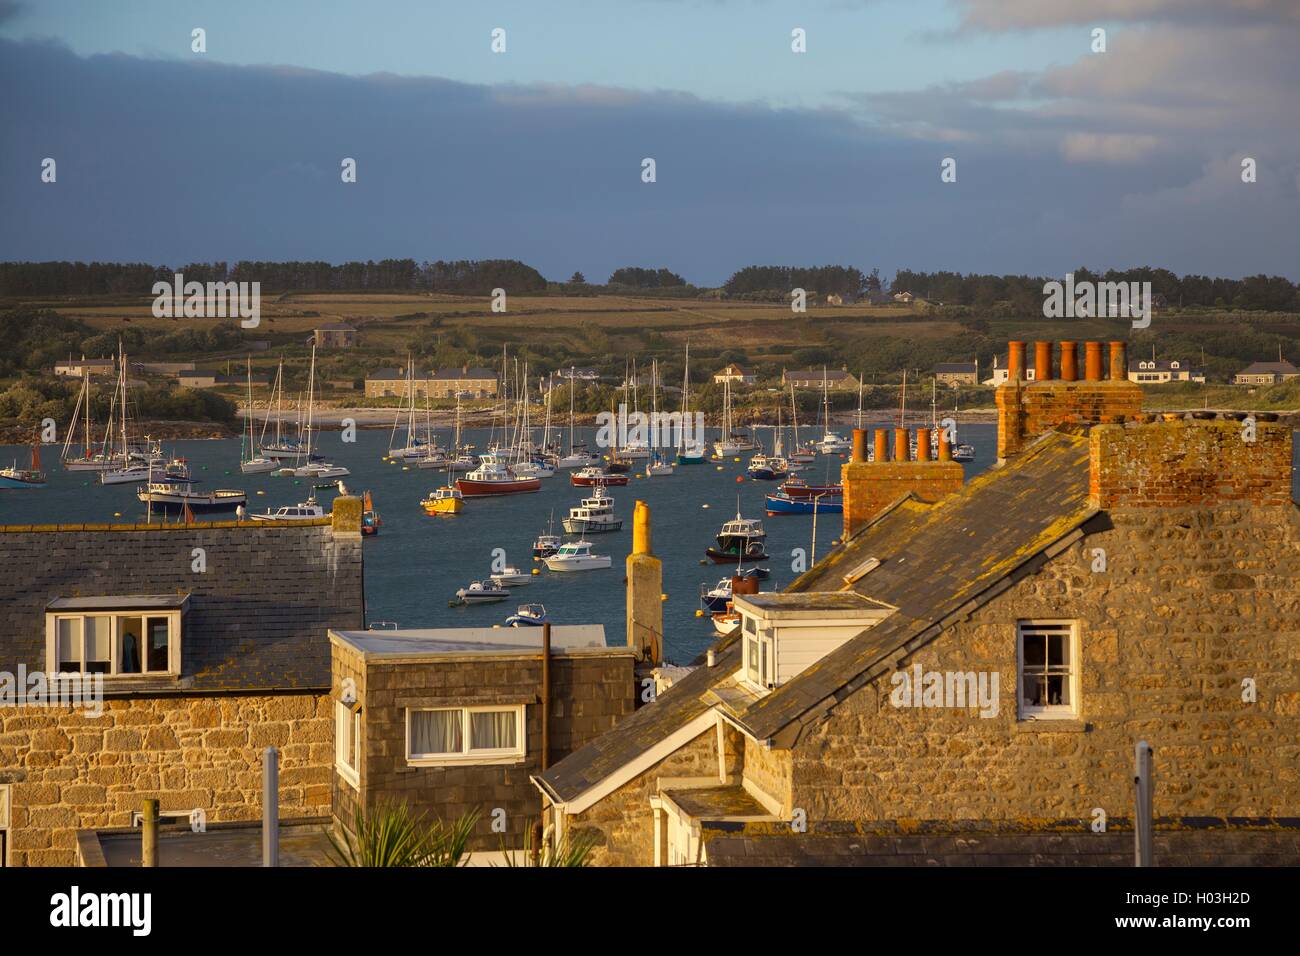 St Mary's Harbour, Isles of Scilly, England Stock Photo